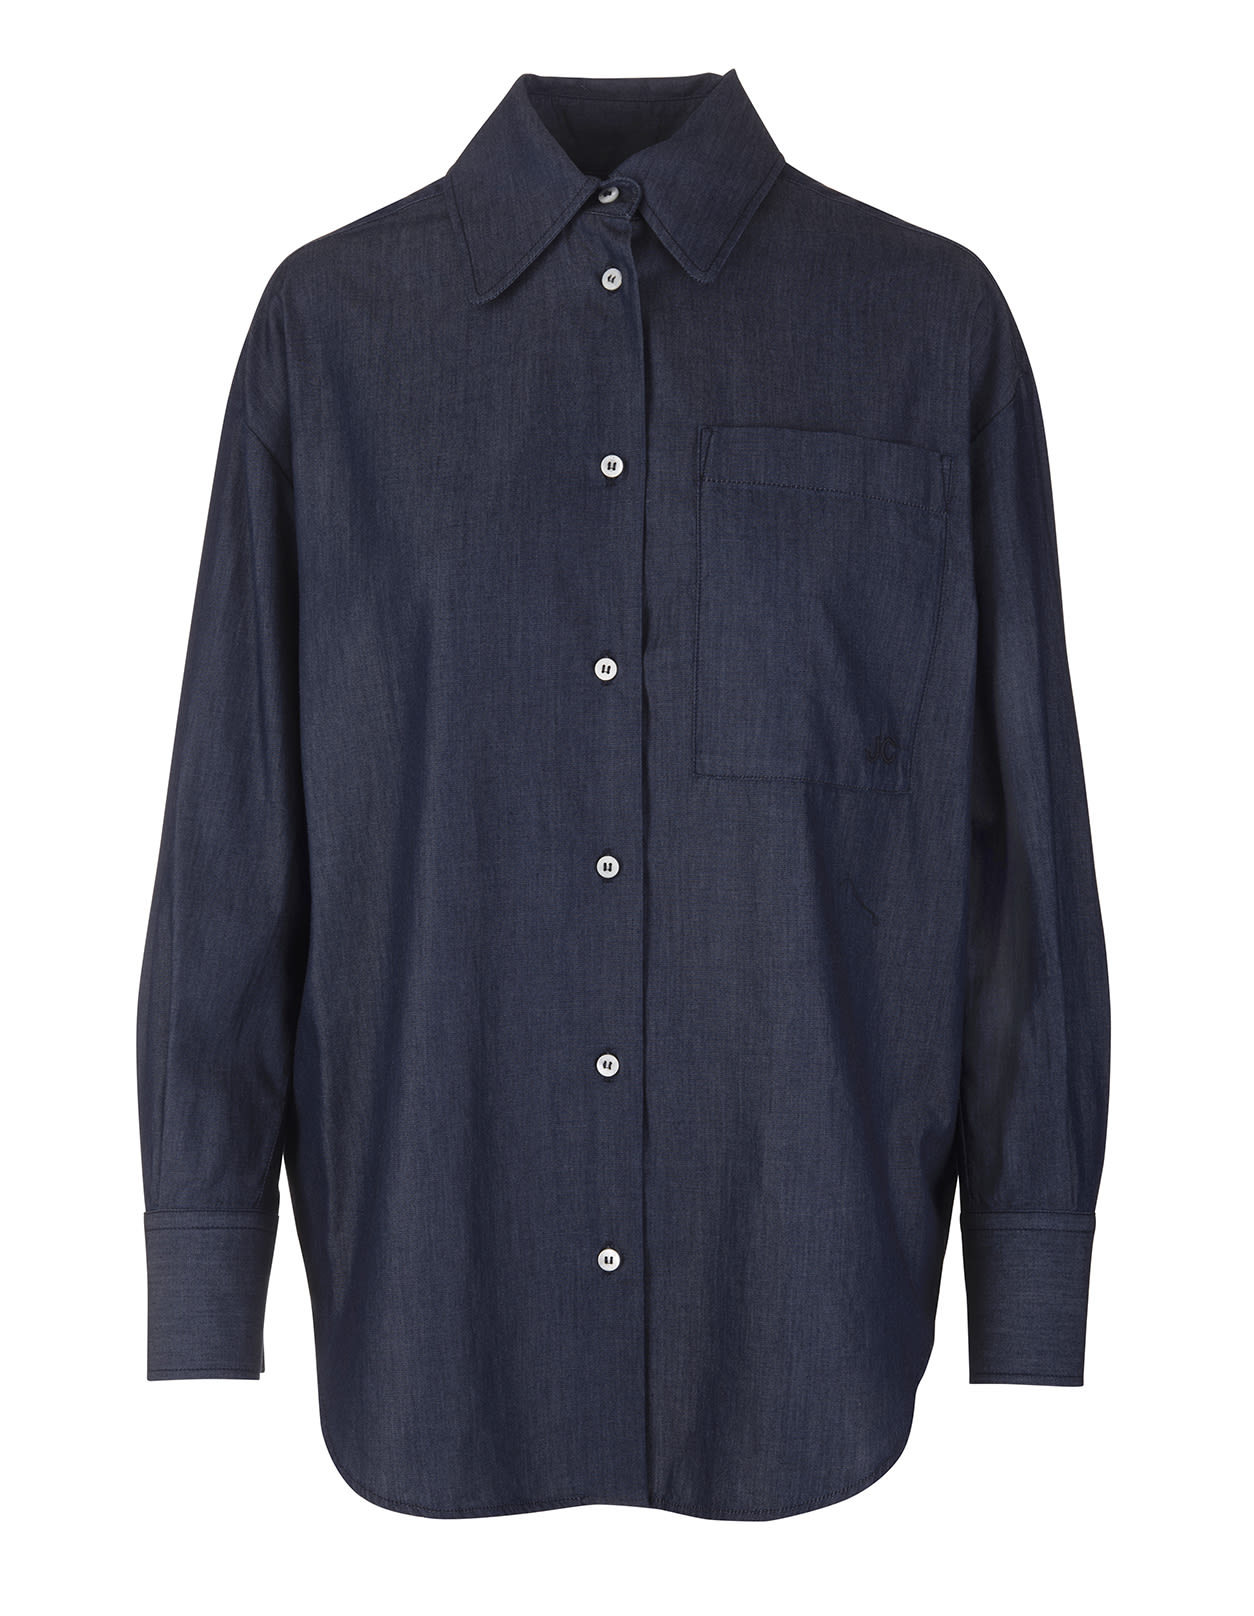 Jacob Cohen Woman Oversize Shirt In Navy Blue Chambray